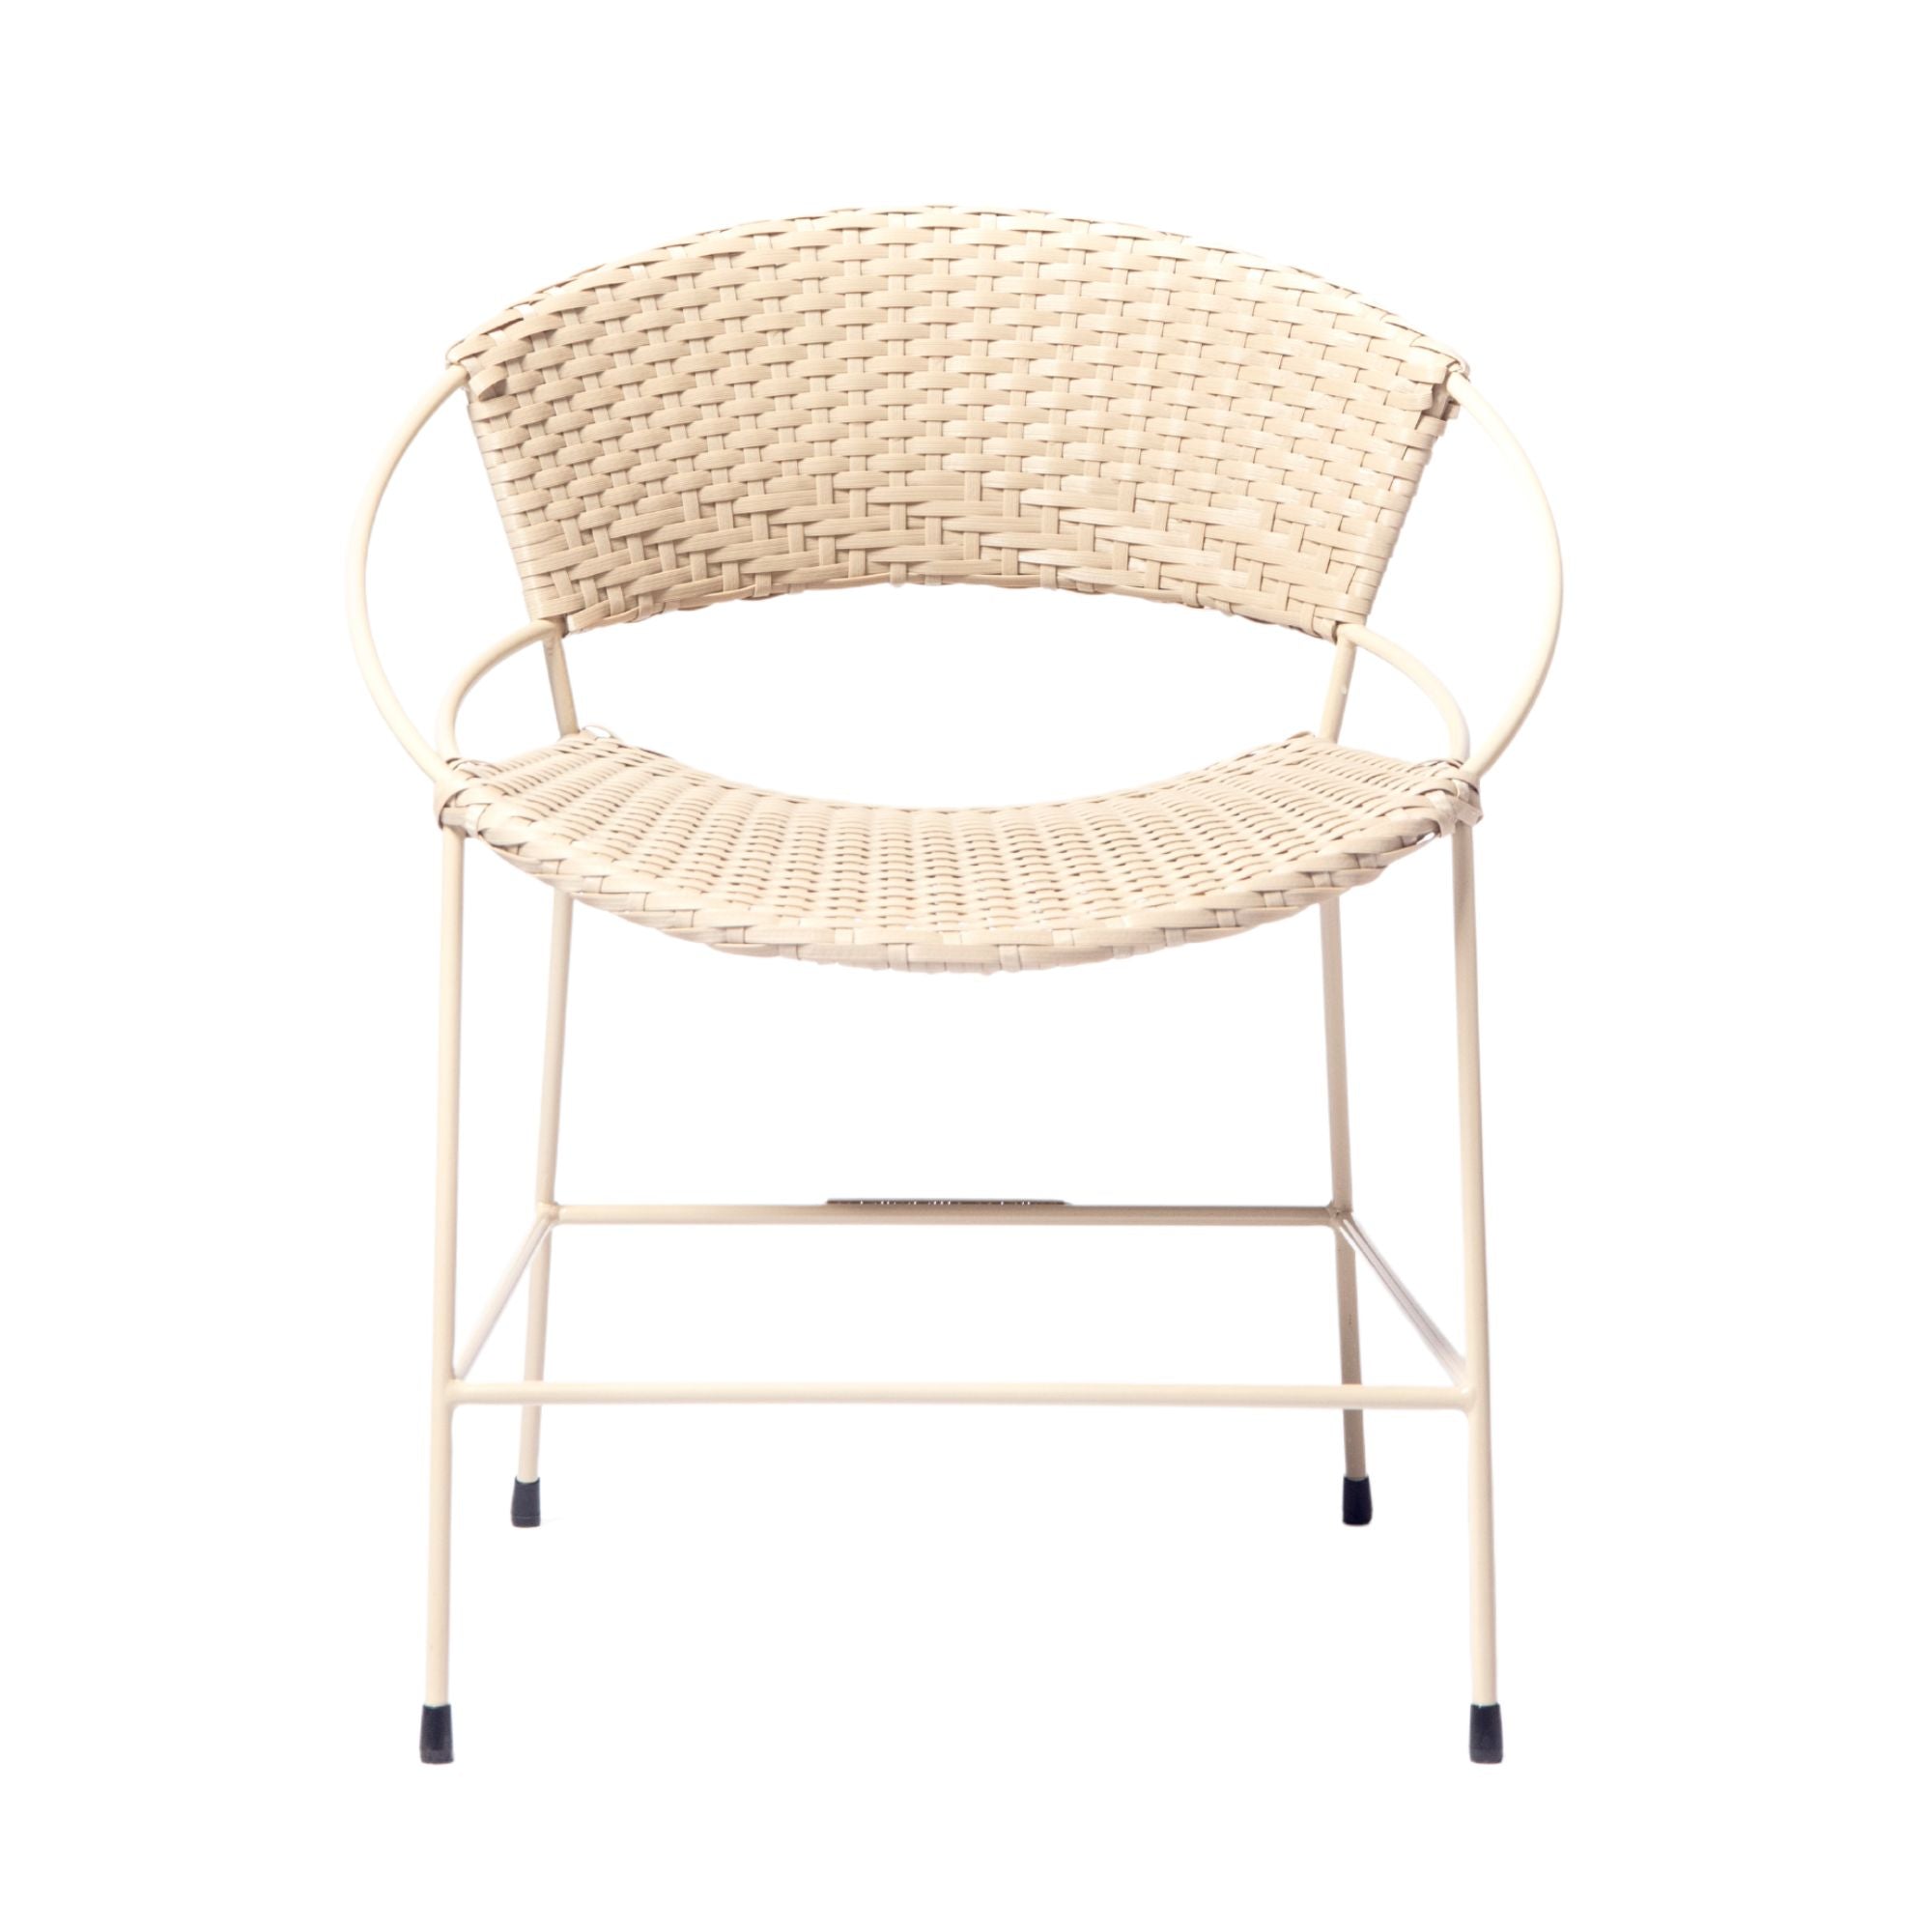 Woven Outdoor Dining Chair - Amarula